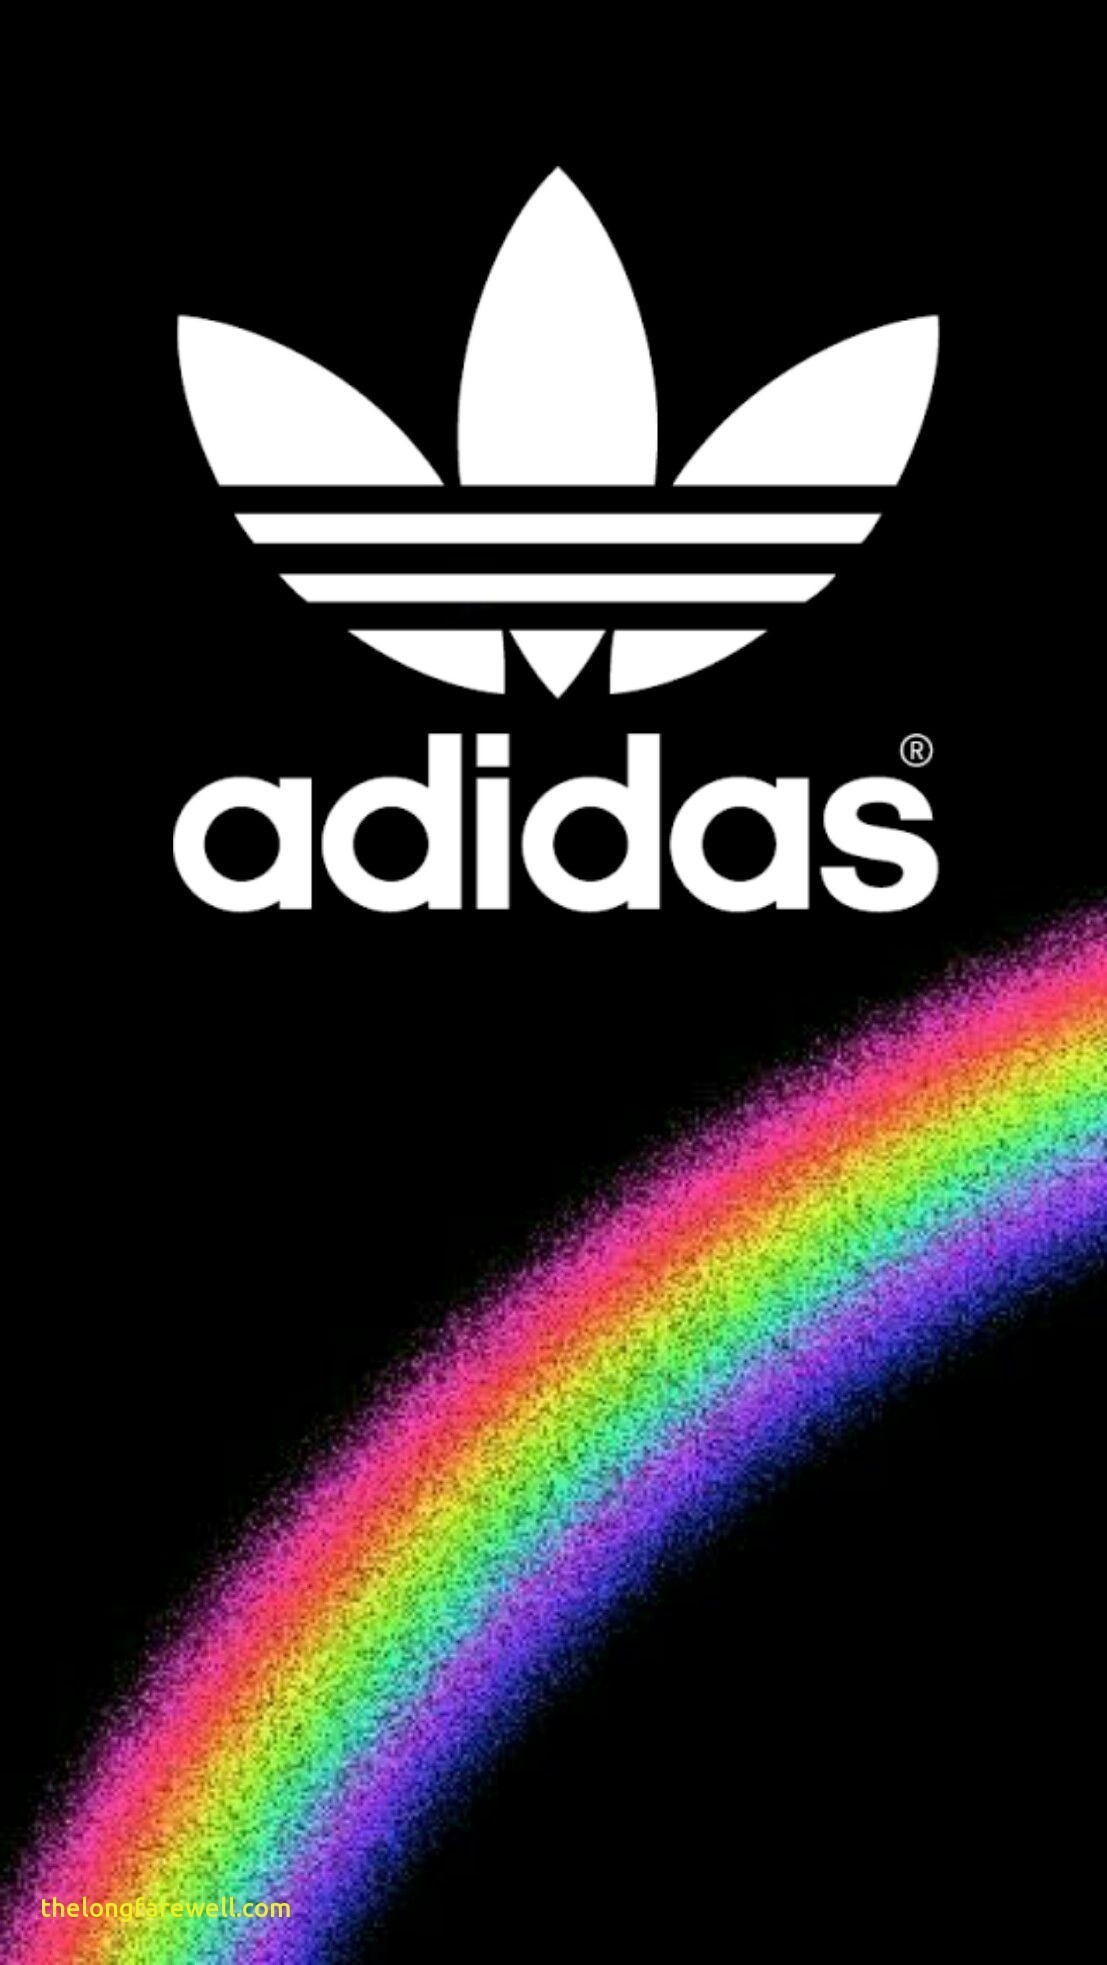 1107x1965 adidas black wallpaper android iphone